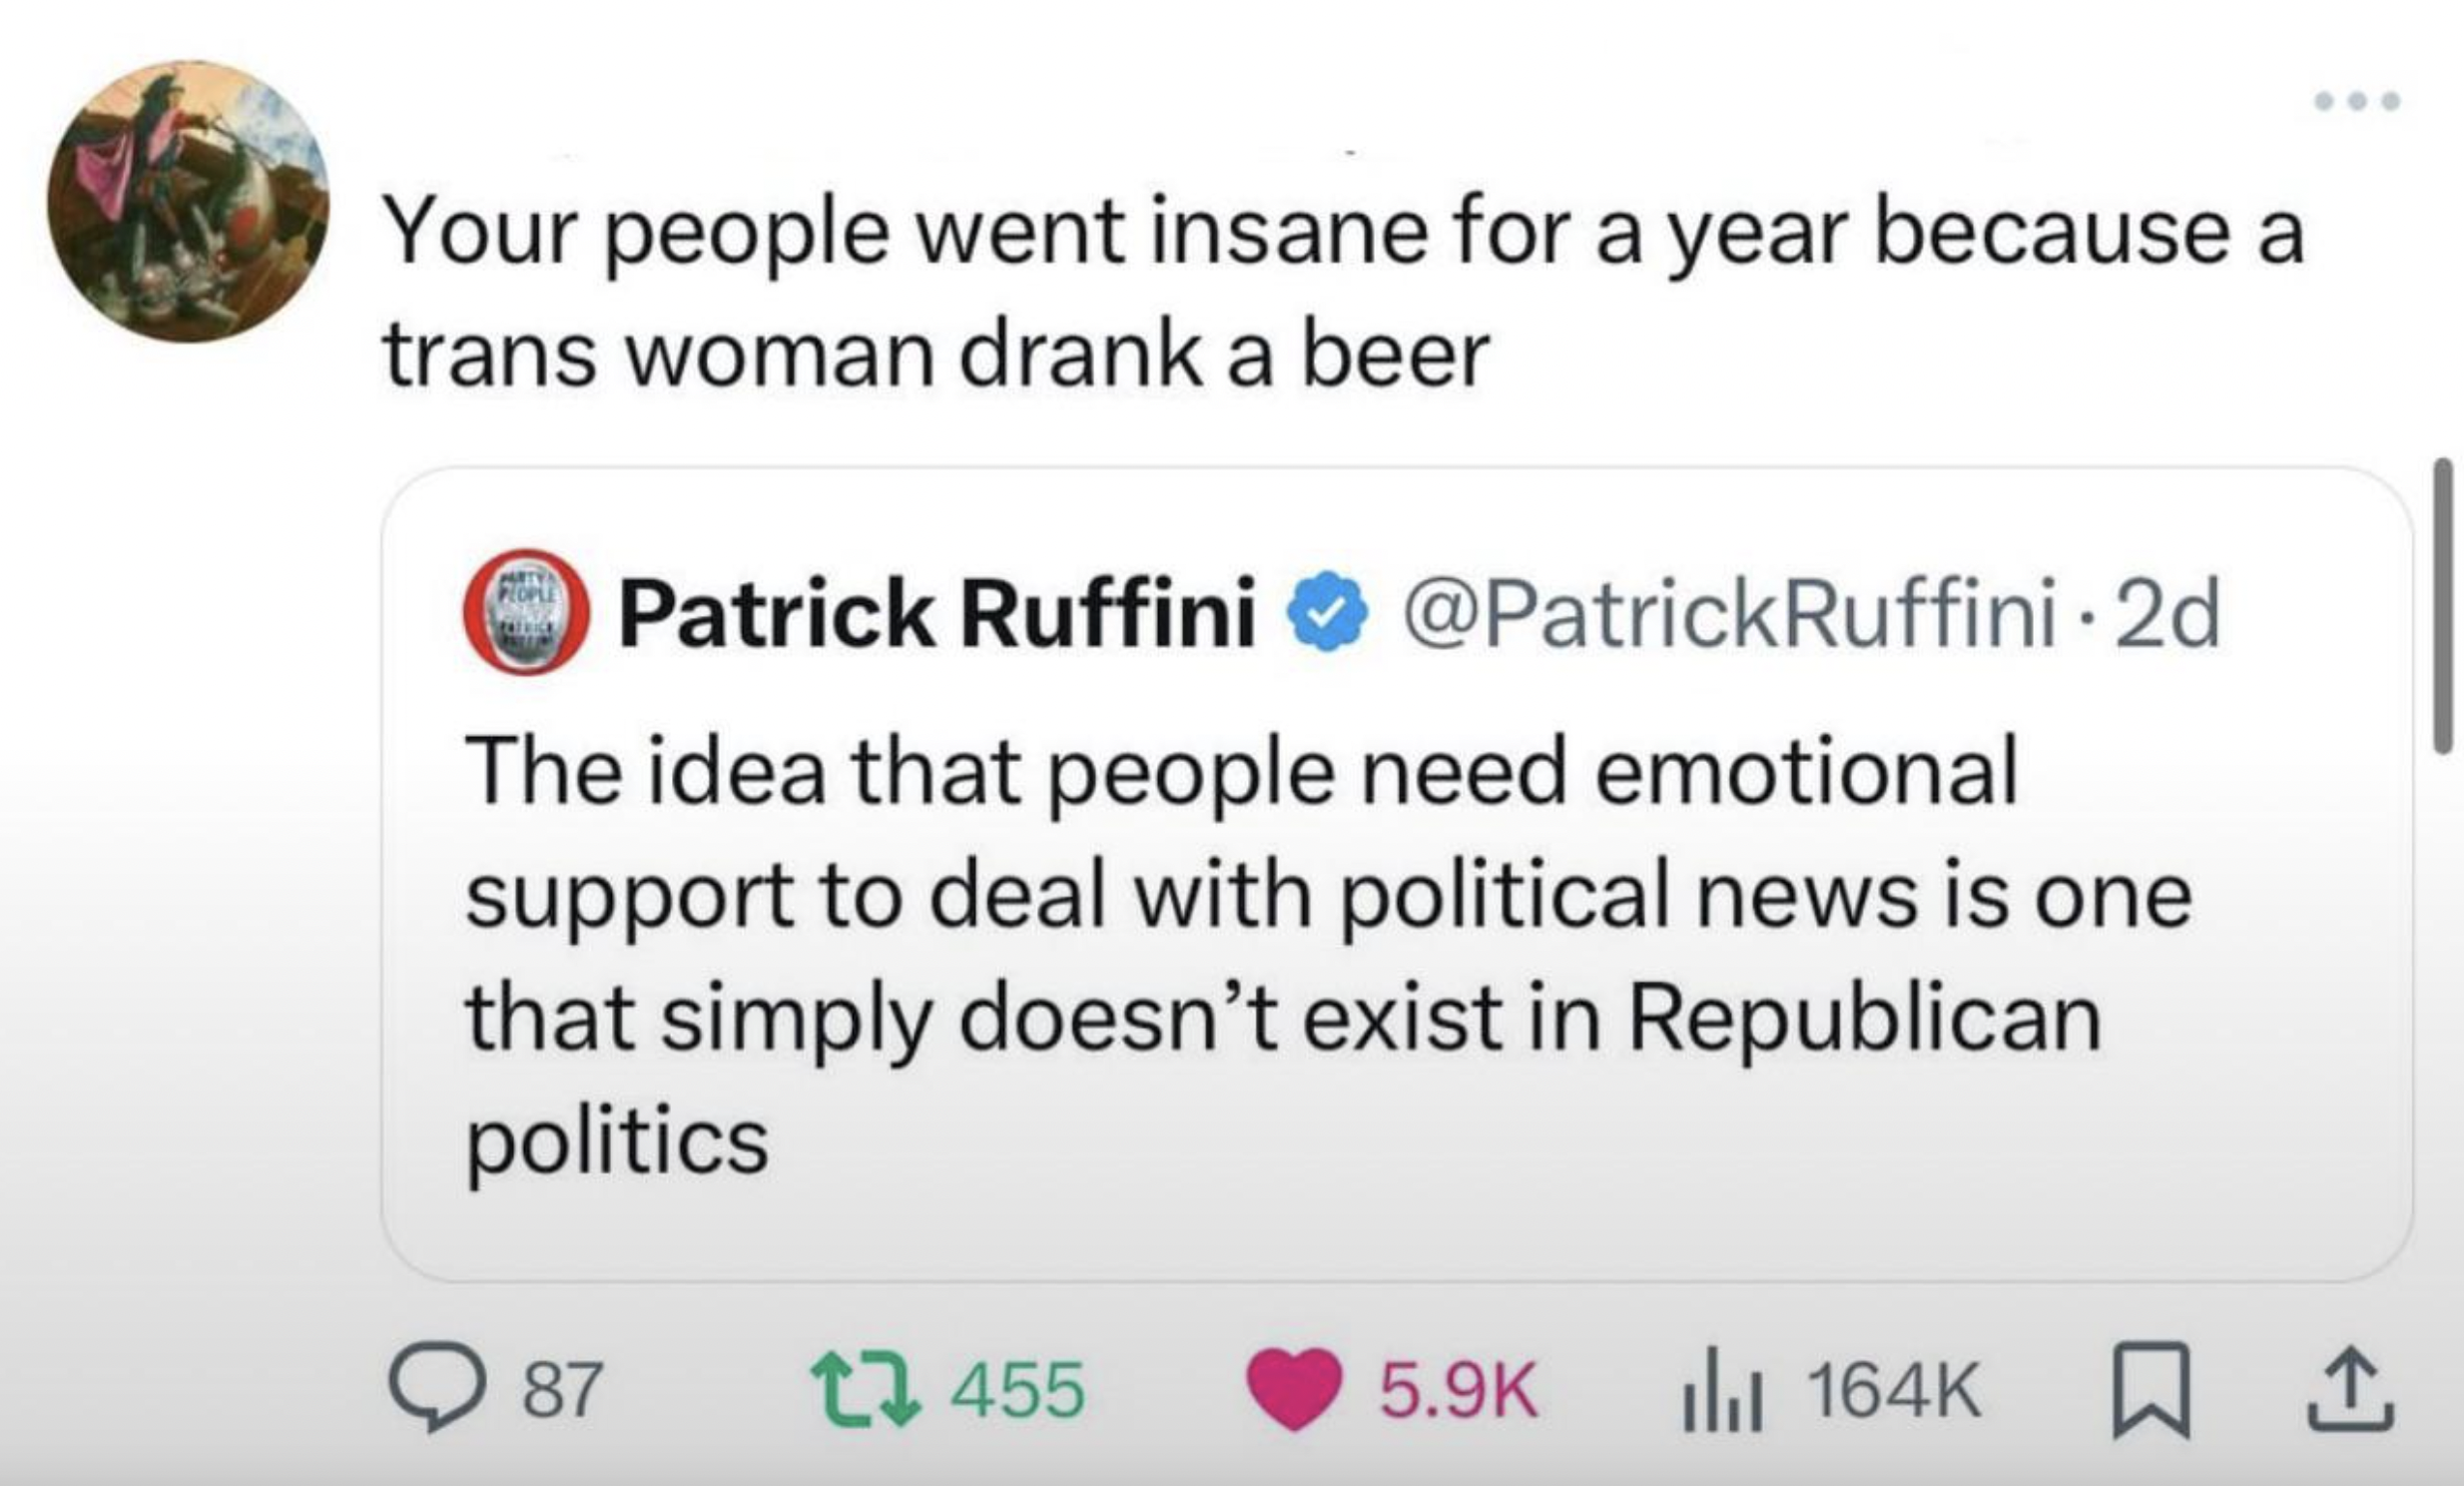 screenshot - Your people went insane for a year because a trans woman drank a beer Patrick Ruffini 2d The idea that people need emotional support to deal with political news is one that simply doesn't exist in Republican politics 87 1455